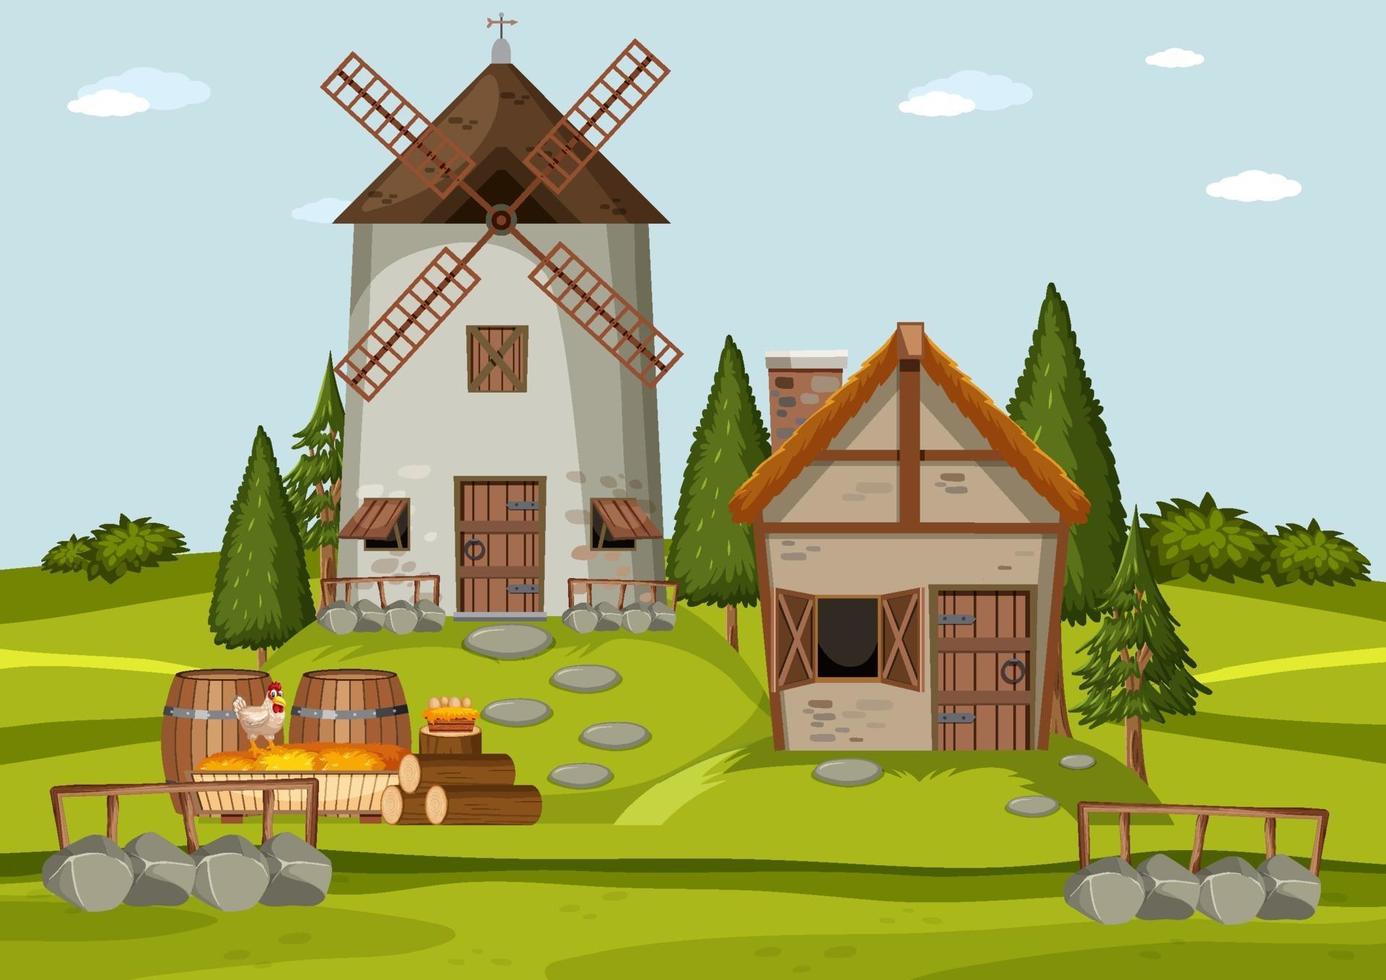 Medieval house style outdoor scene vector